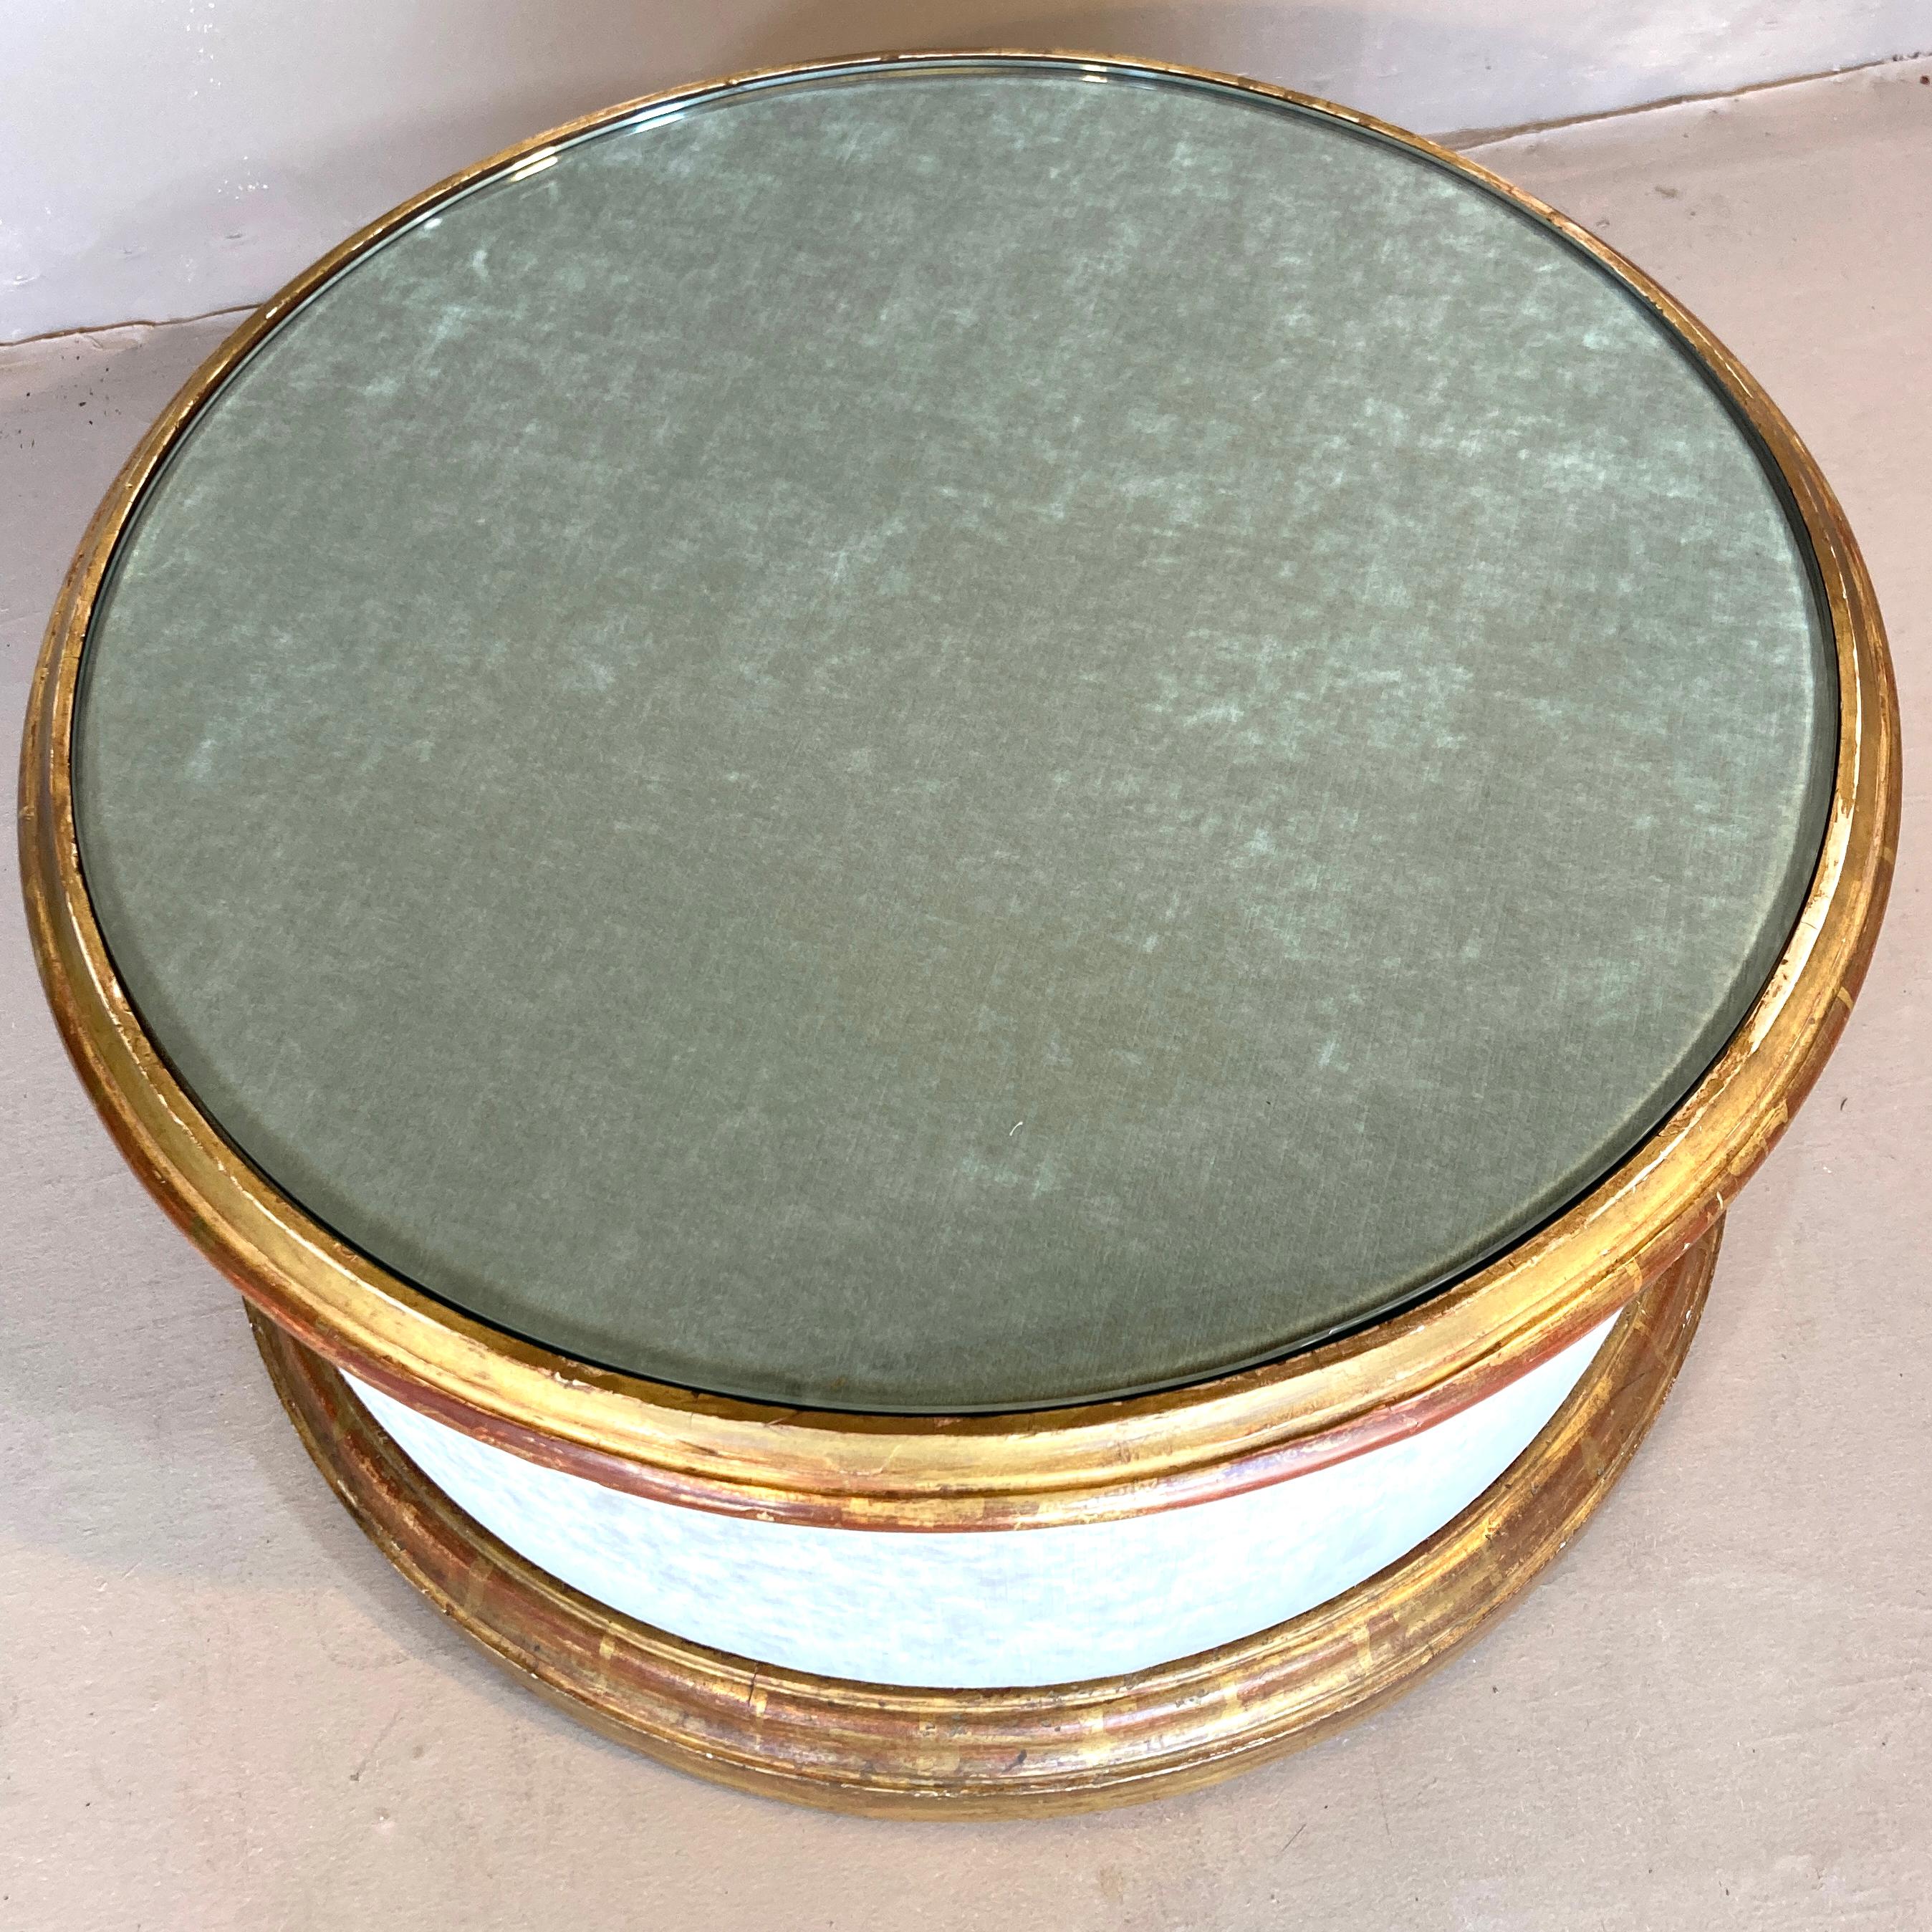 A truly unique 1940s coffee table, probably custom-built for a designer in the Philadelphia area. The molded and gilded rings are highly unusual - and they can be removed for a different fabric choice. The house-worn surface of the gilding is quite